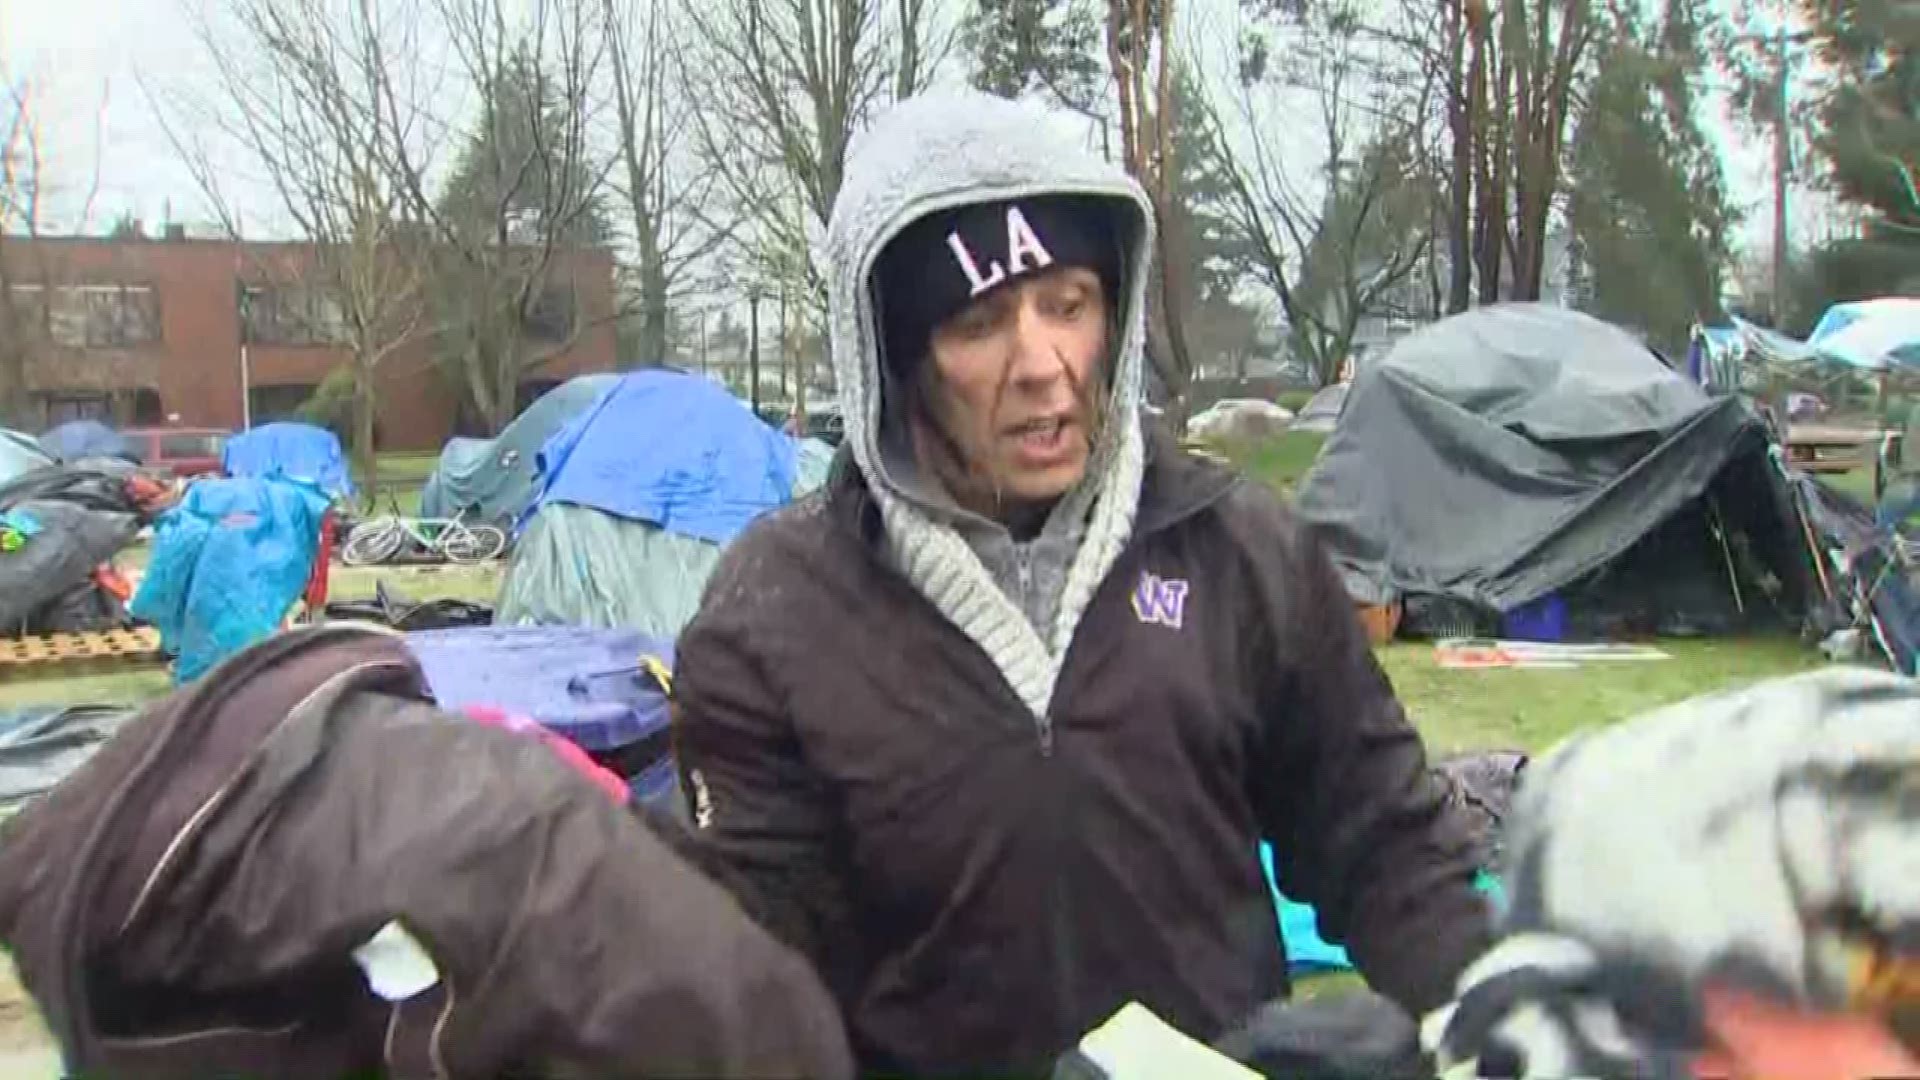 A ban on certain kinds of tents went into effect in Tacoma today, and tonight people who are homeless and living in "People's Park," are scrambling to find shelter.